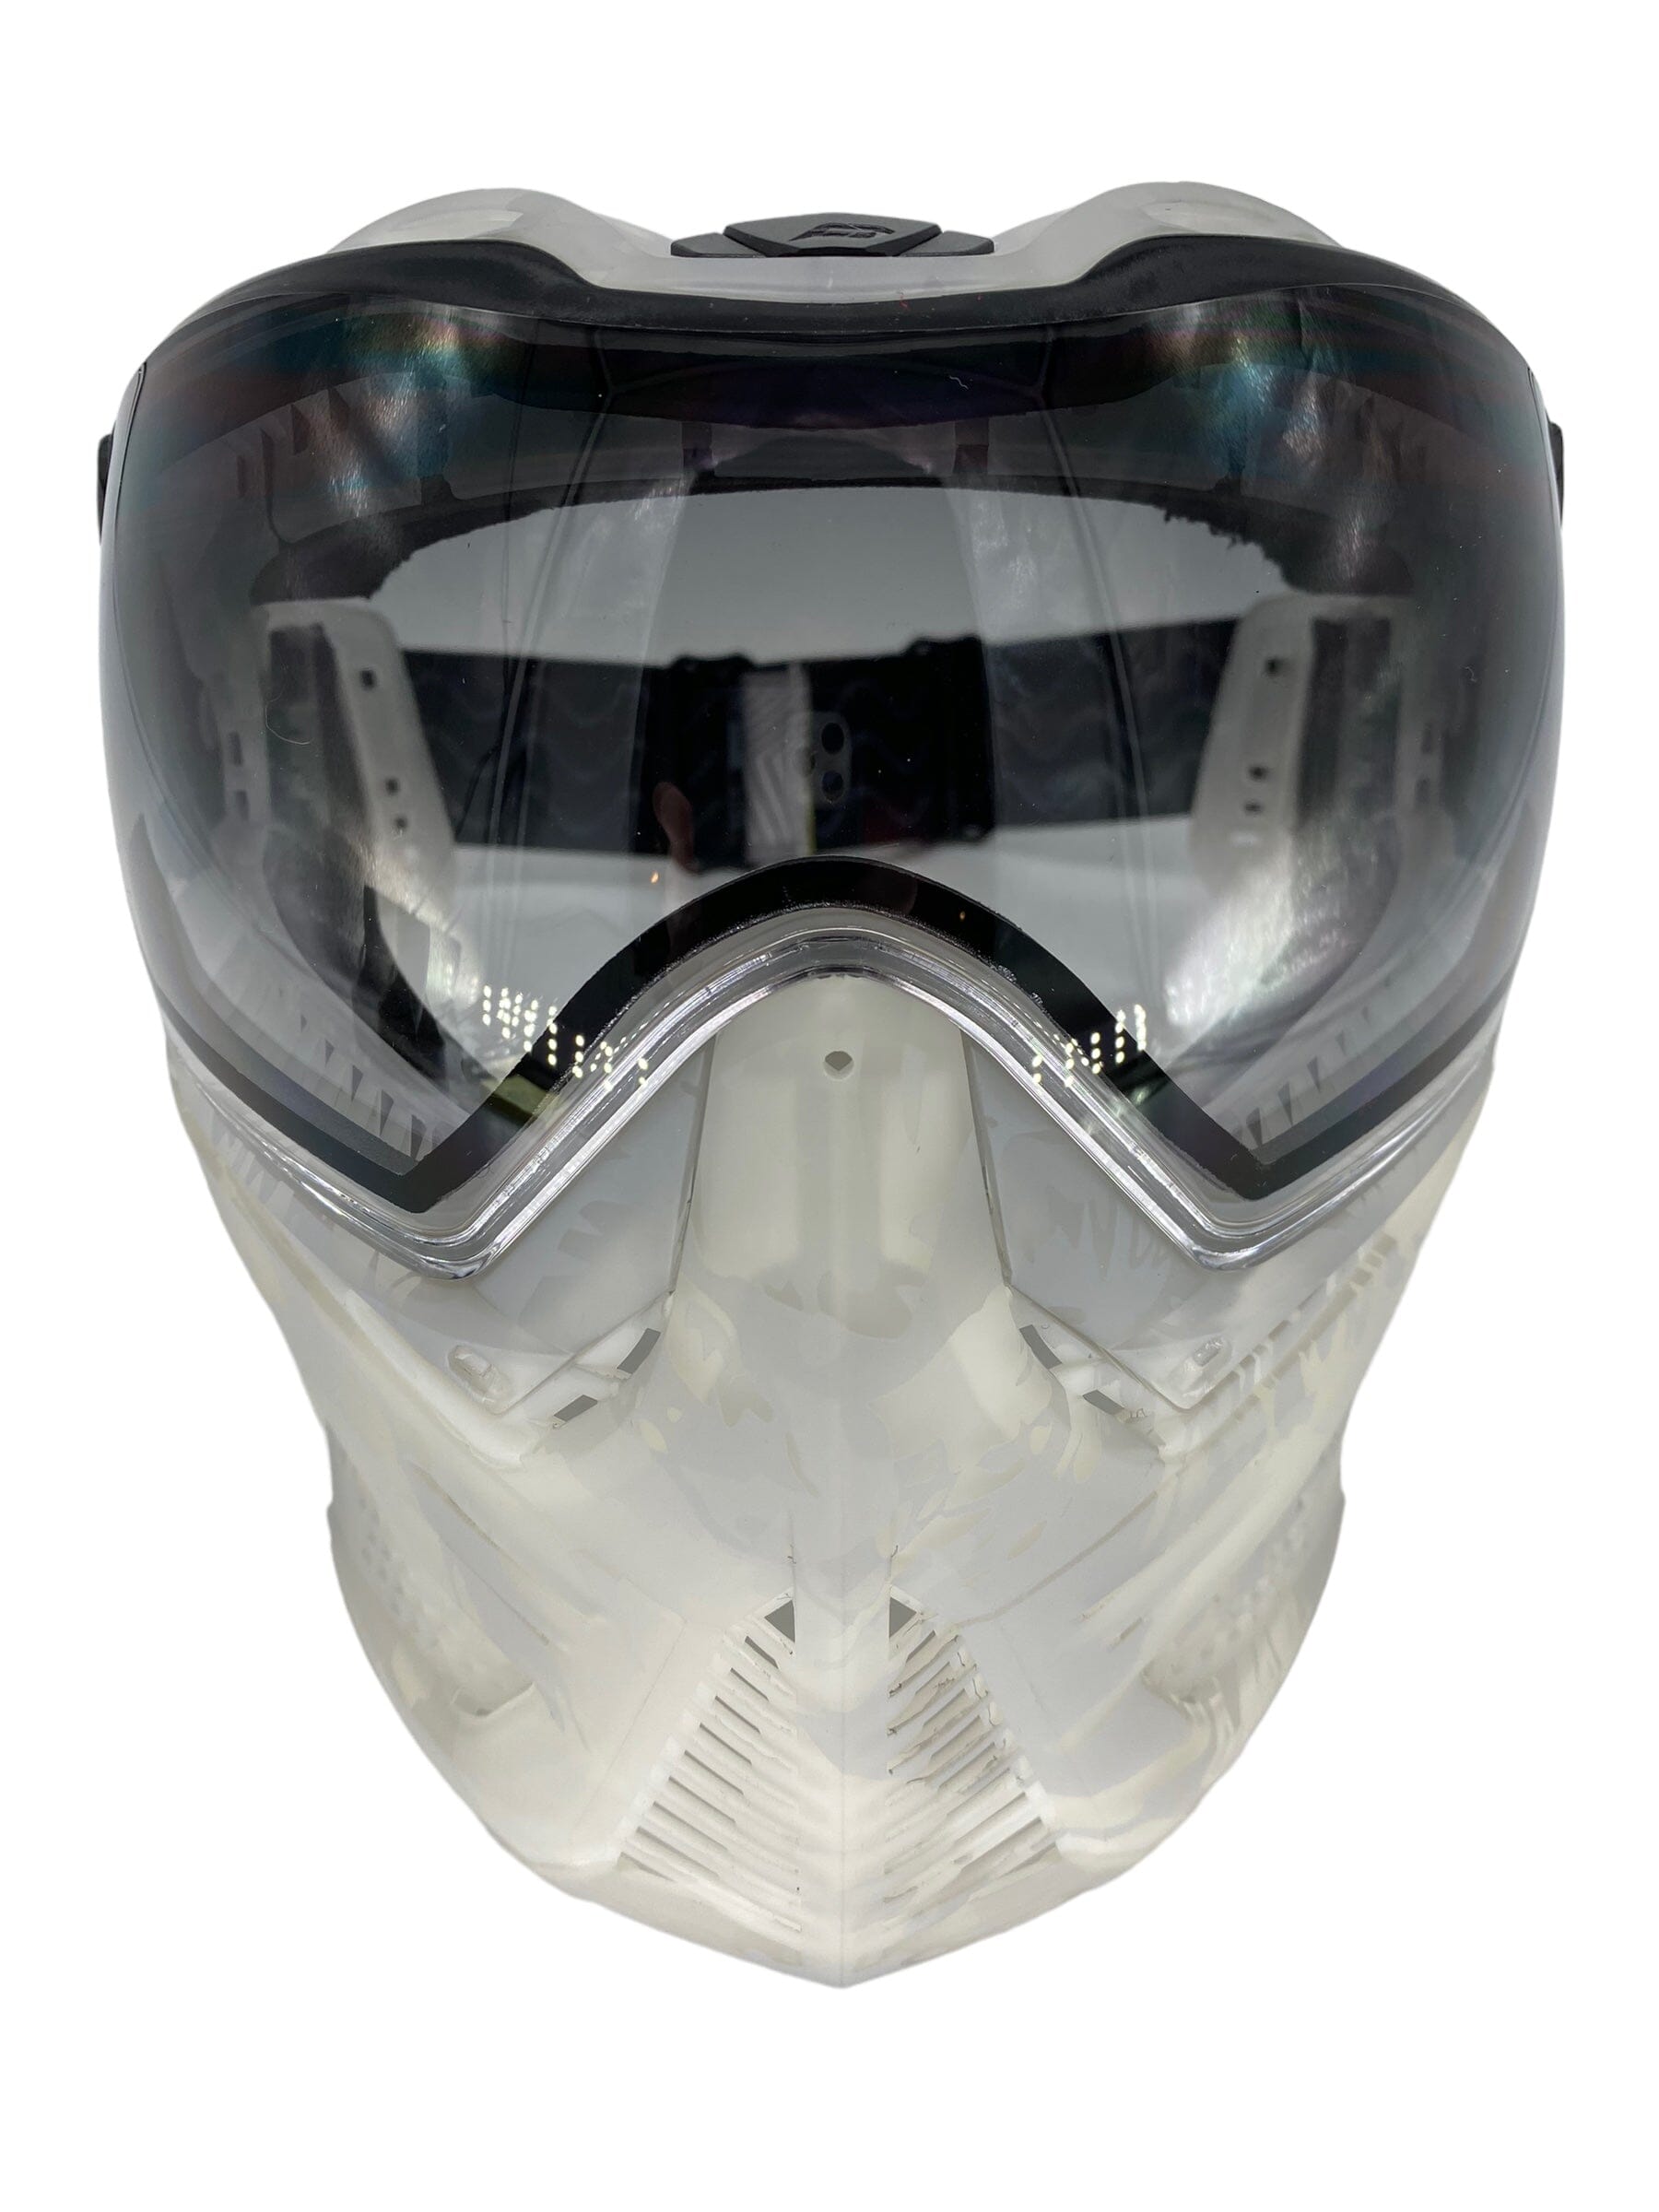 Used Push Unite Paintball Mask Paintball Gun from CPXBrosPaintball Buy/Sell/Trade Paintball Markers, New Paintball Guns, Paintball Hoppers, Paintball Masks, and Hormesis Headbands